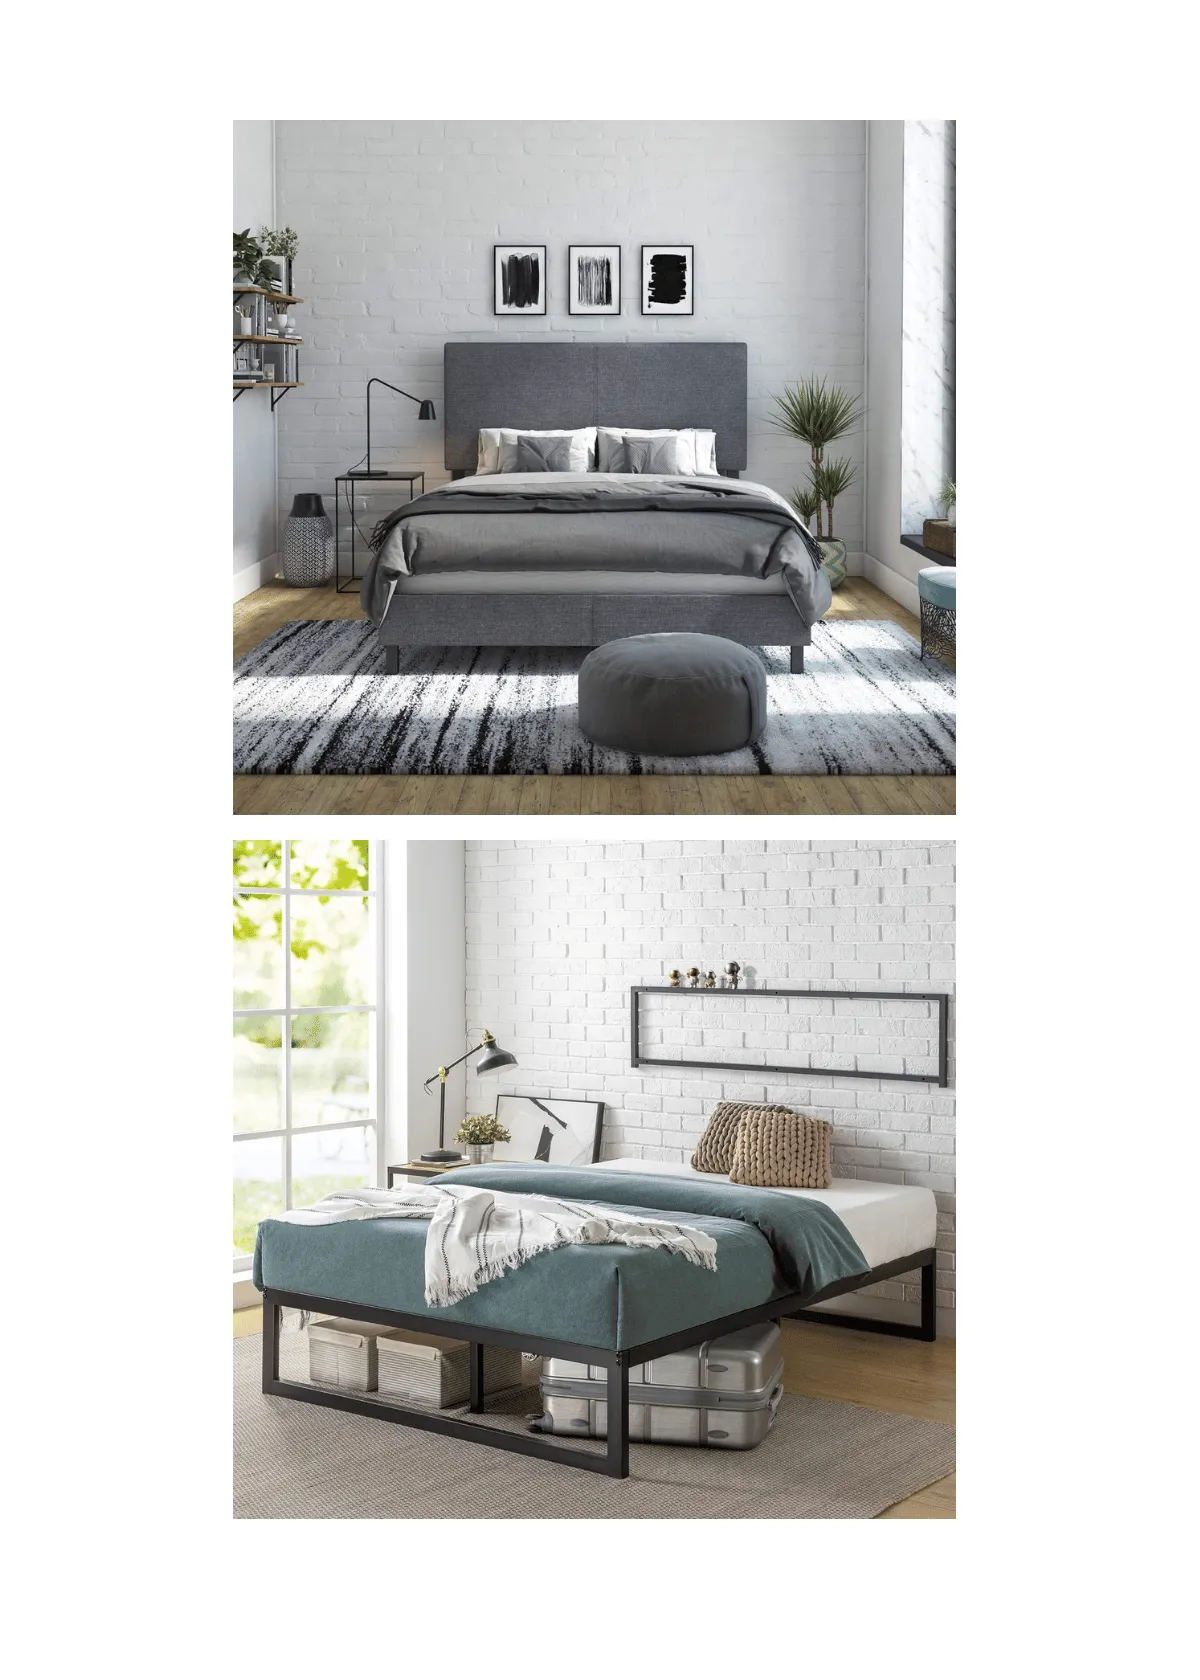 "Queen Bed Frame | Expert Top Picks and Buying Tips"